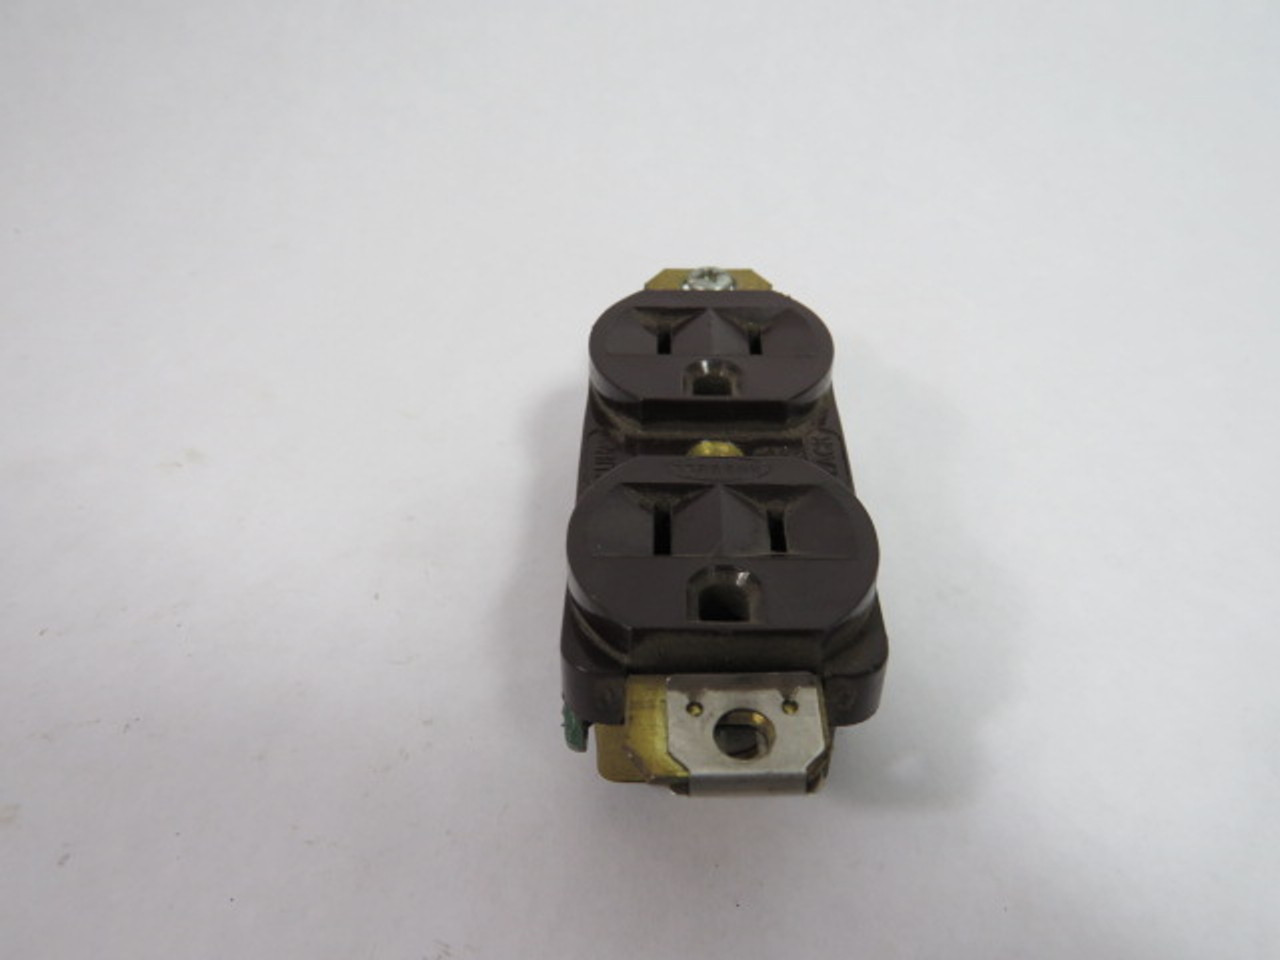 Hubbell 5252 Brown Duplex Receptacle 15A 125V 3W 2P USED